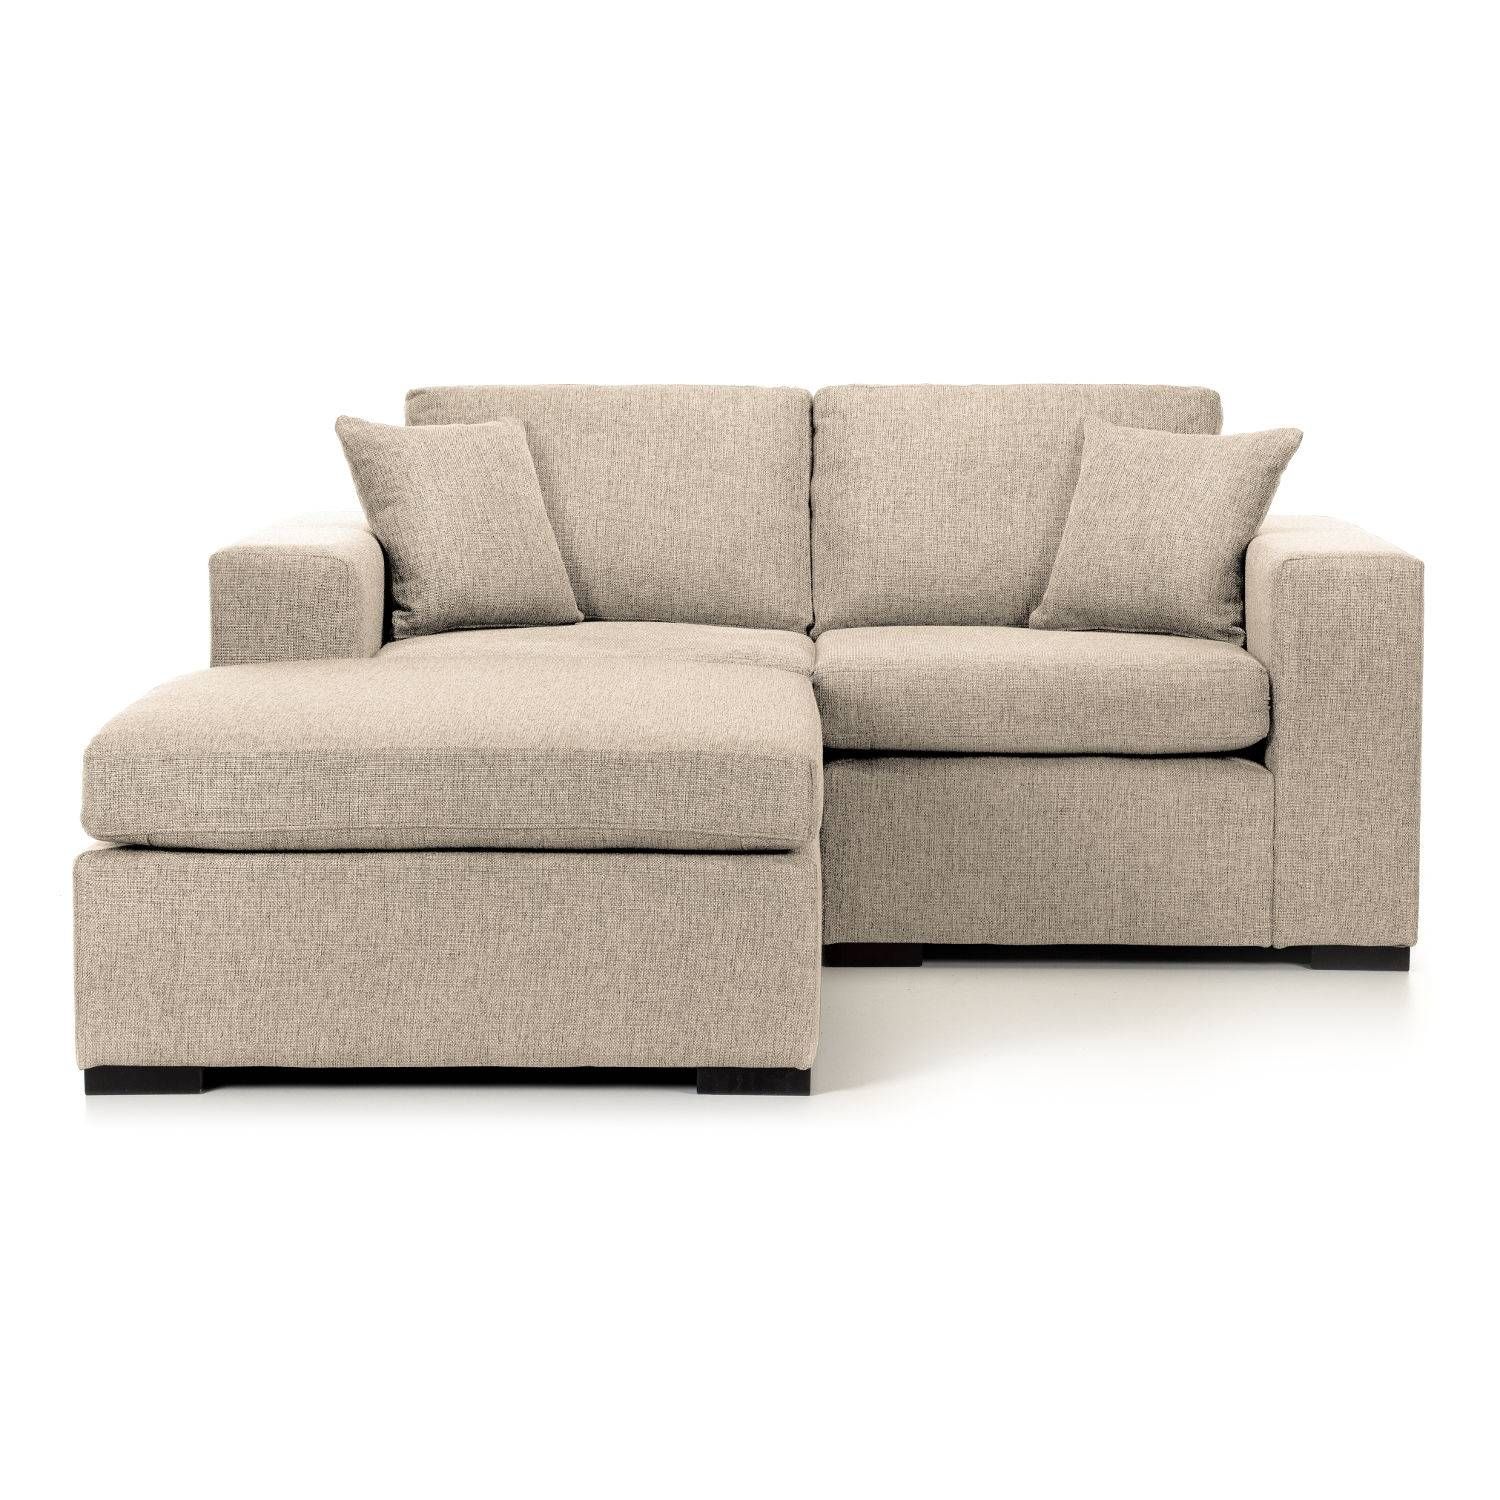 Small Modular Sofa Superb 13 Sofas For Spaces – Gnscl Pertaining To Small Modular Sofas (View 1 of 25)